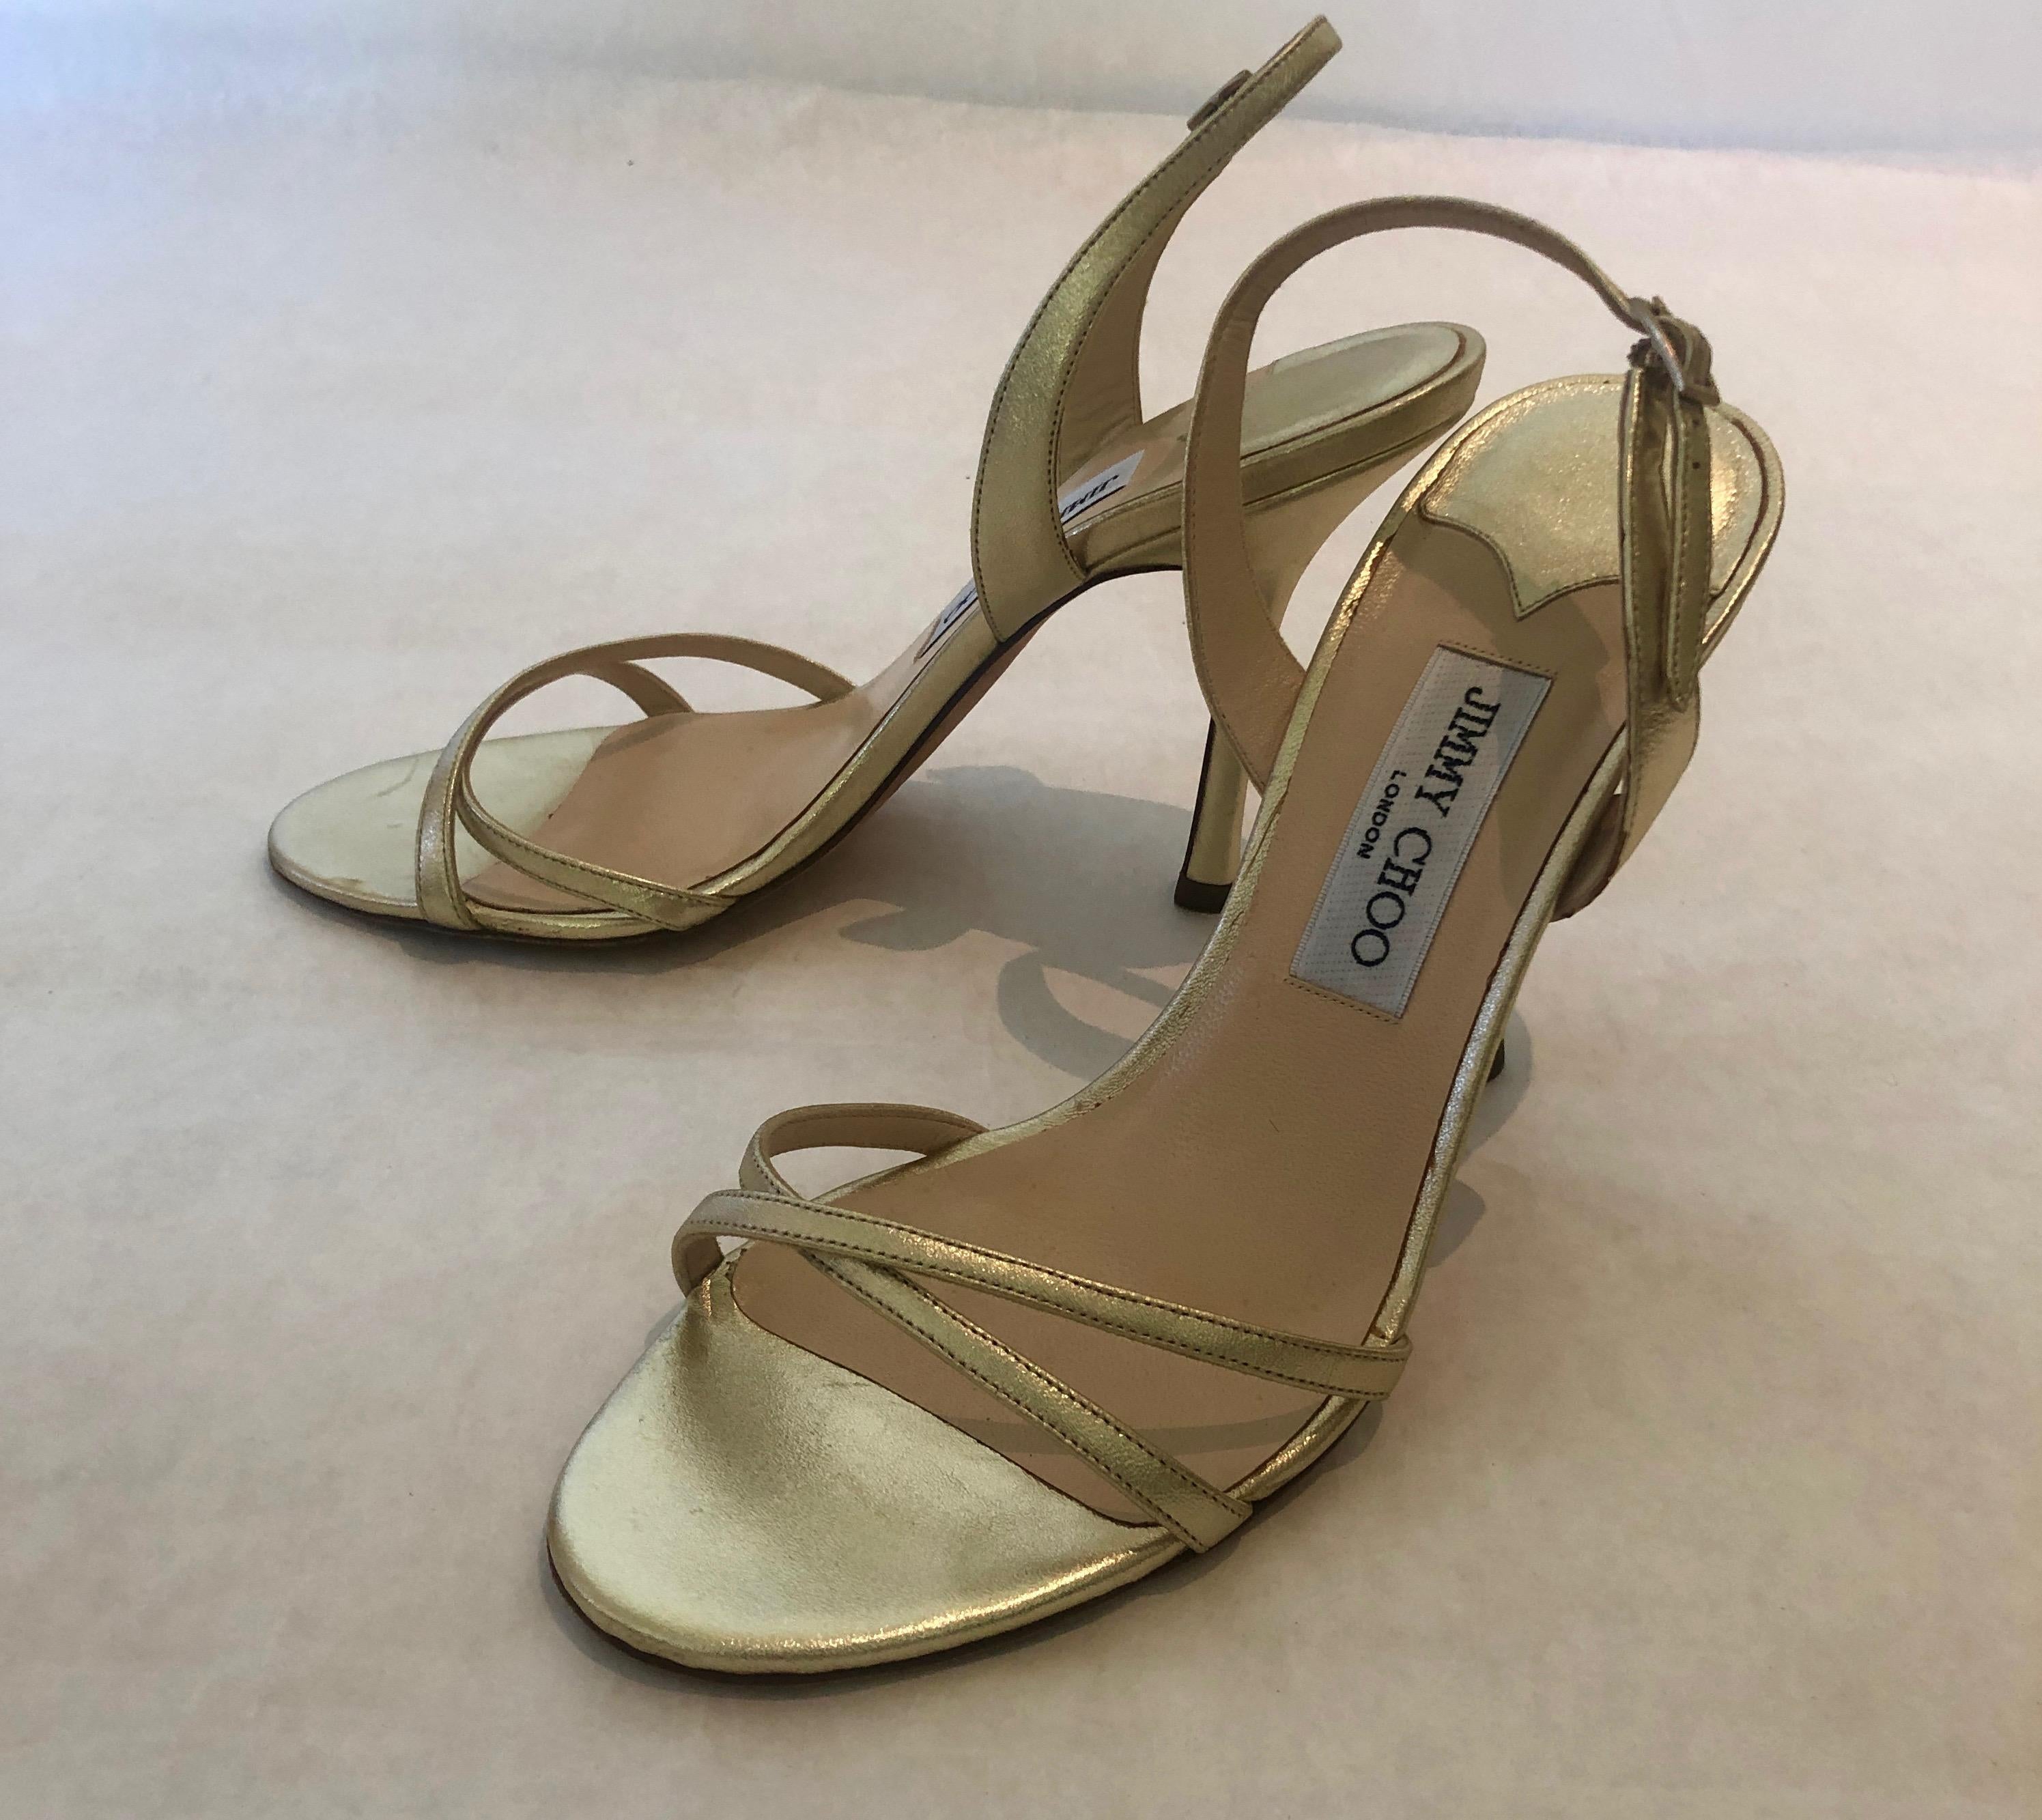 Pair of Jimmy Choo Lance Strappy Metallic Gold Stiletto Leather Sandal  In Good Condition For Sale In Houston, TX